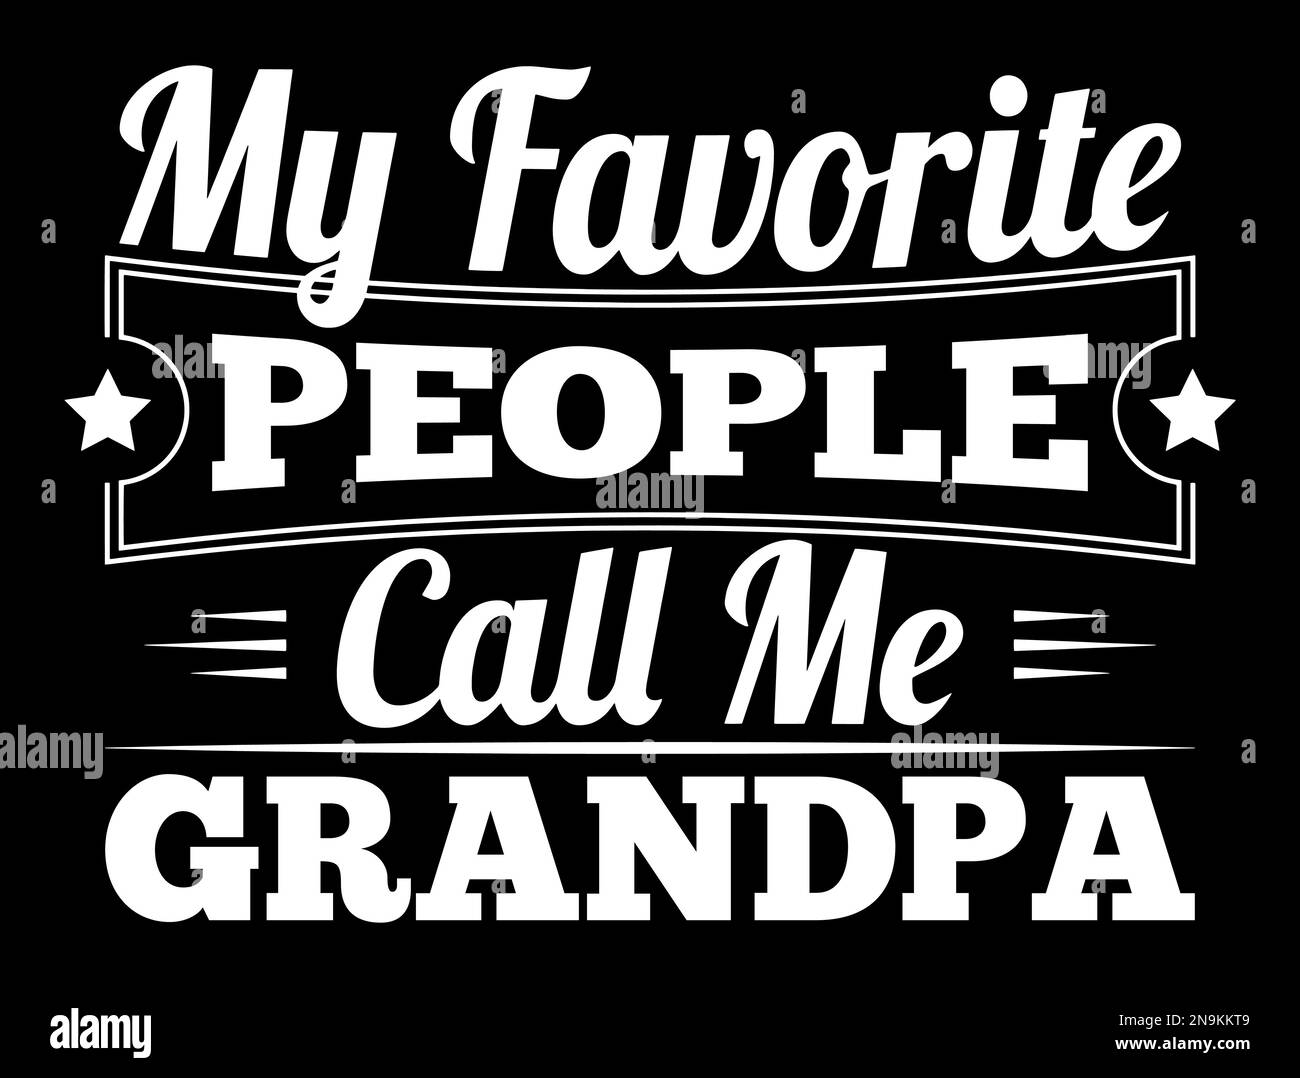 Grandpa Black and White Stock Photos & Images - Alamy